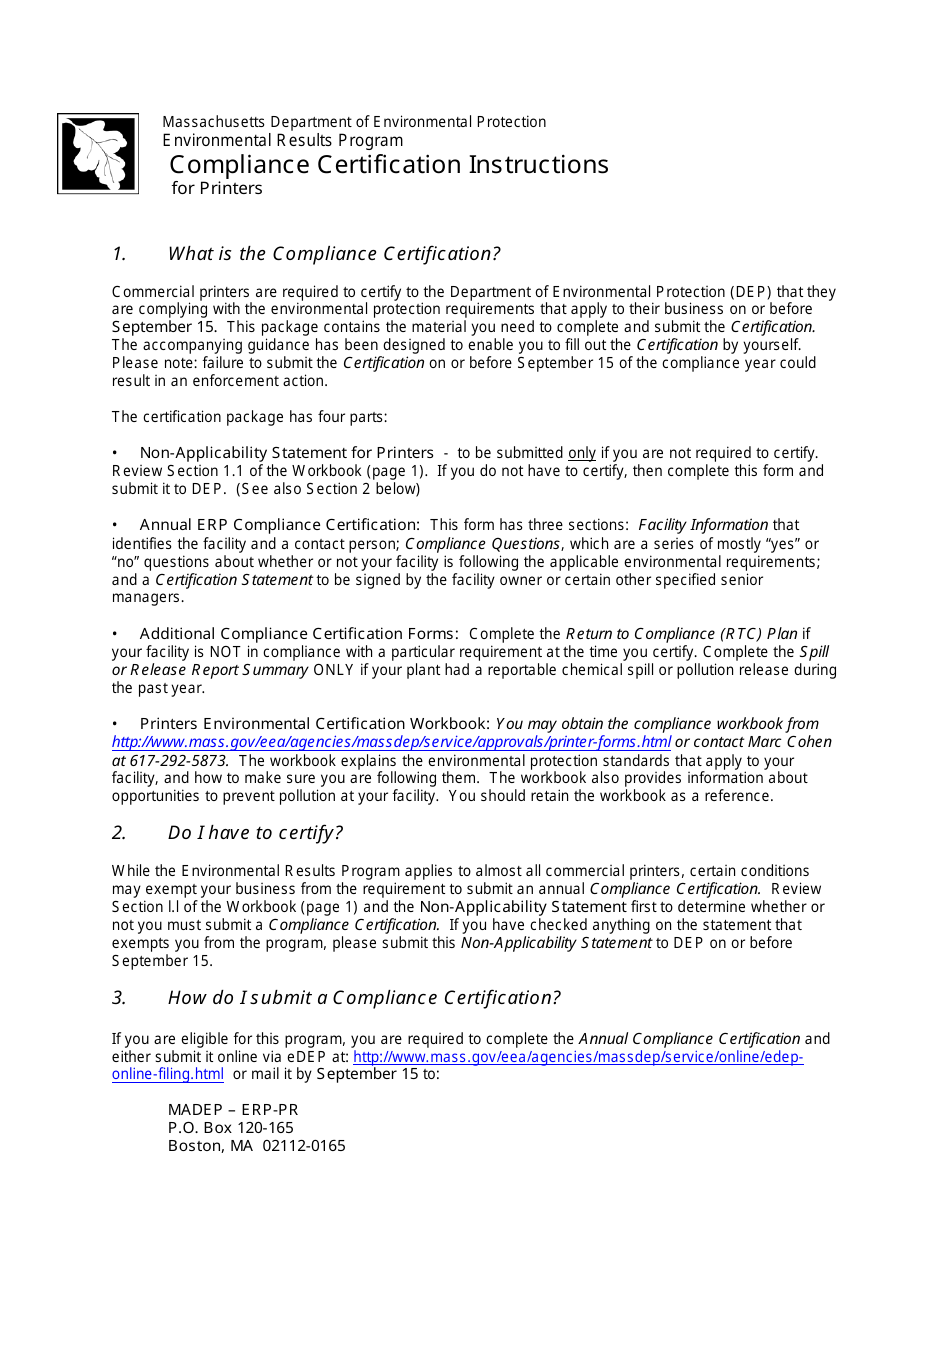 Instructions for Printer Compliance Certification - Massachusetts, Page 1